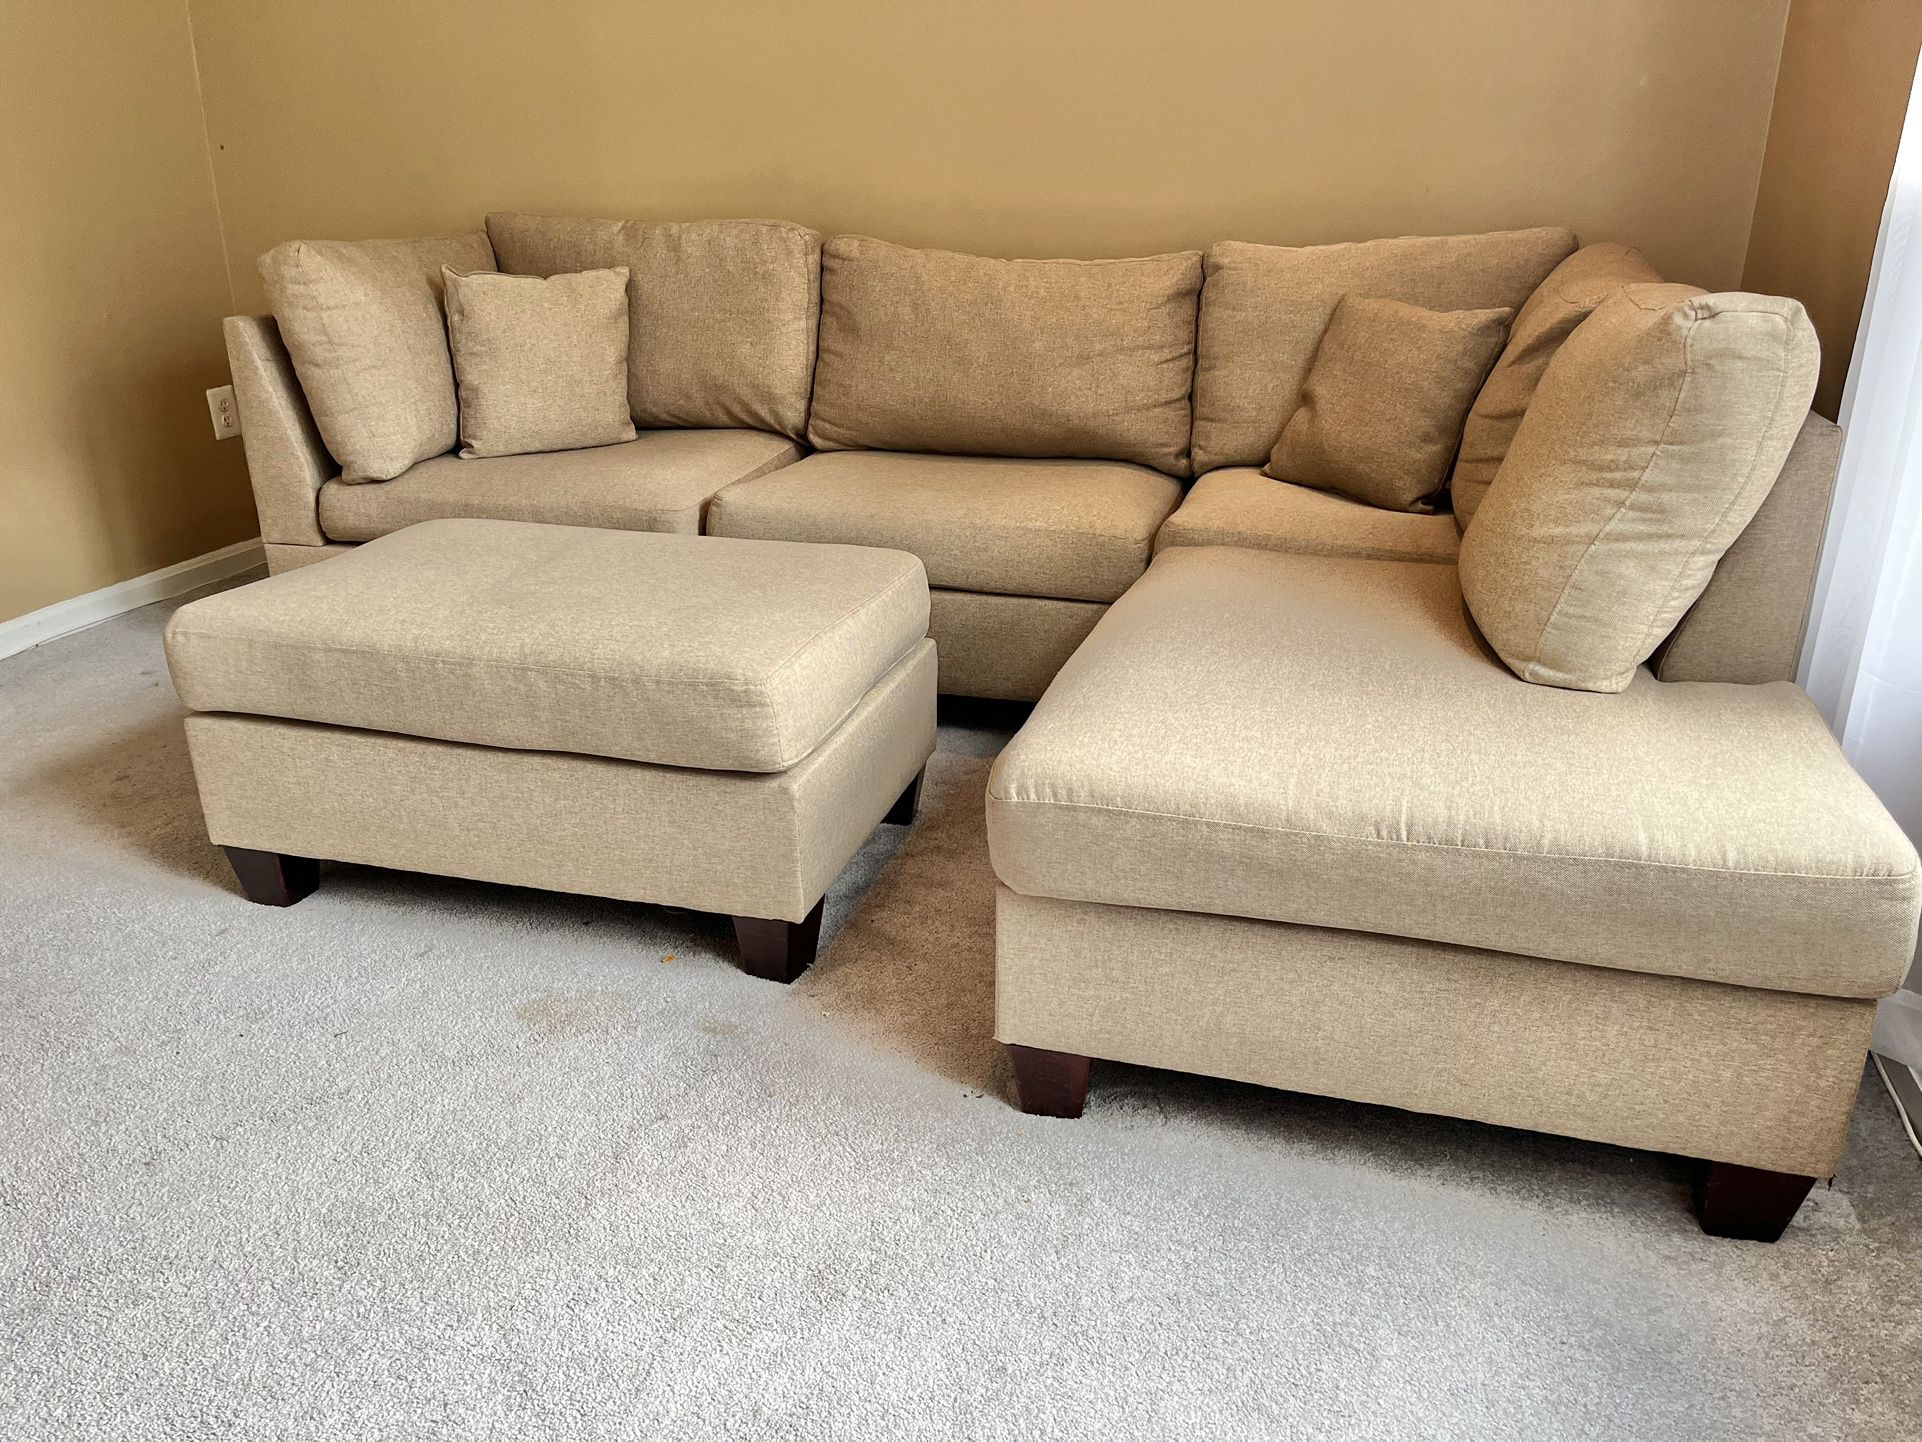 Oatmeal colored wayfair couch with ottoman- Delivery Available